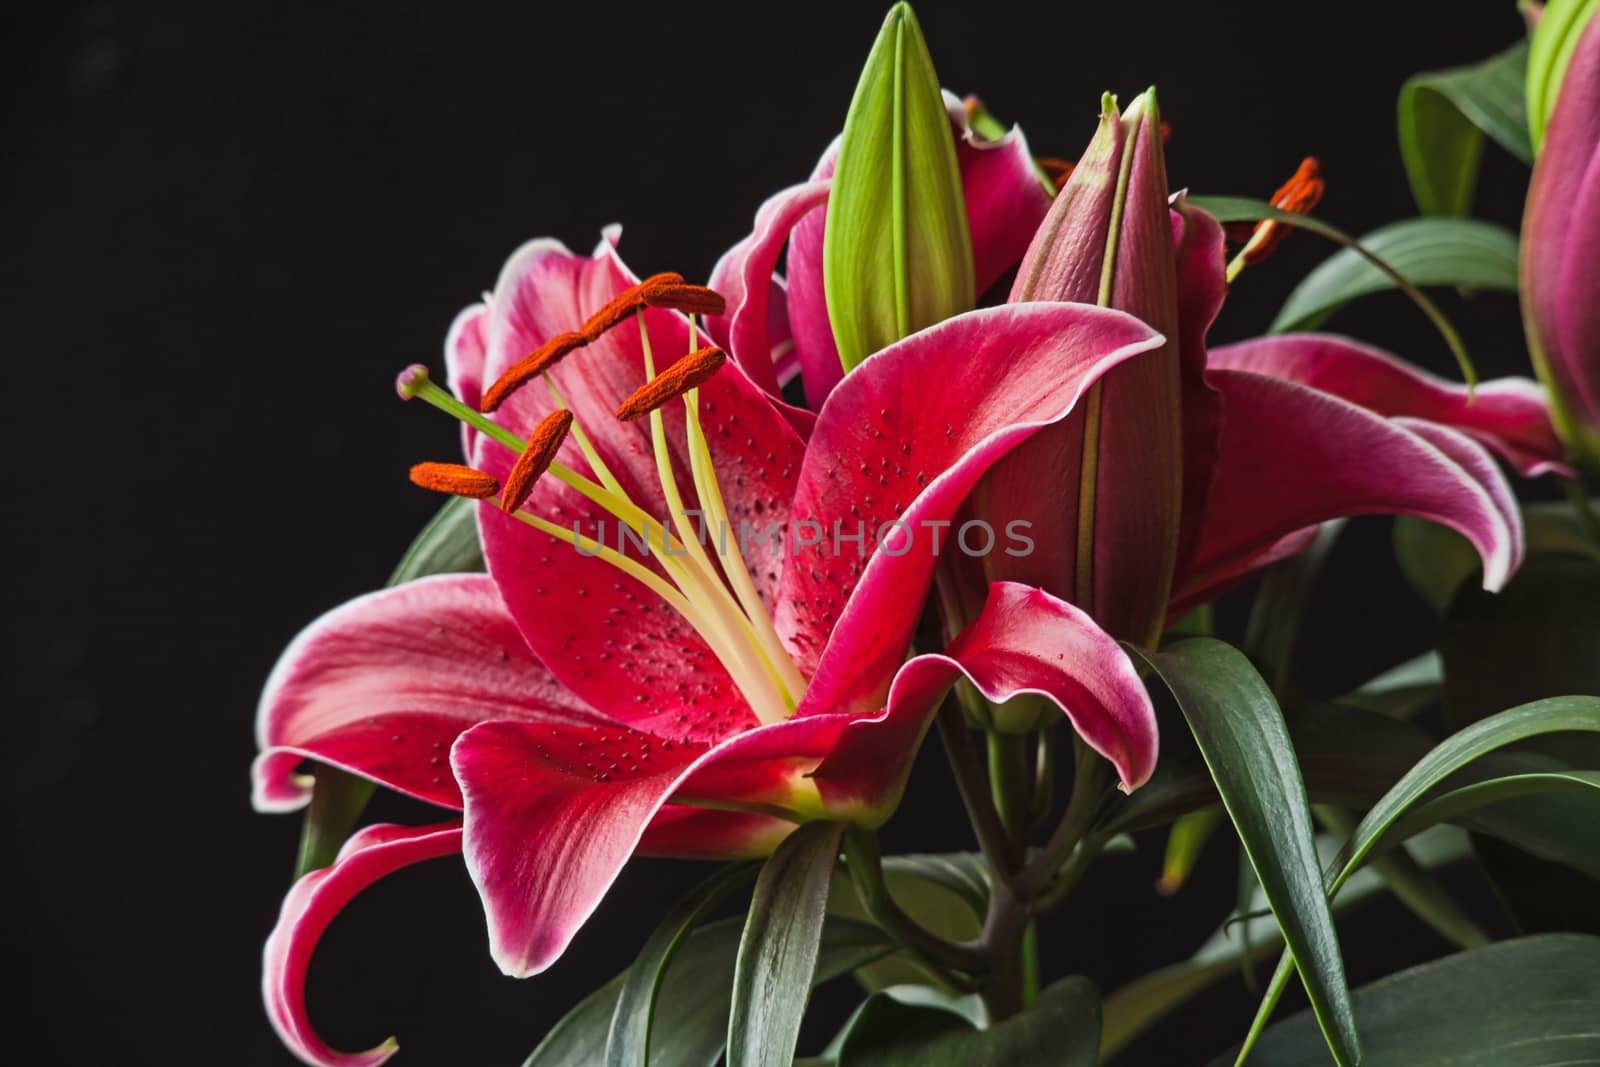 Macro image of a red Oriental Lily in flower.